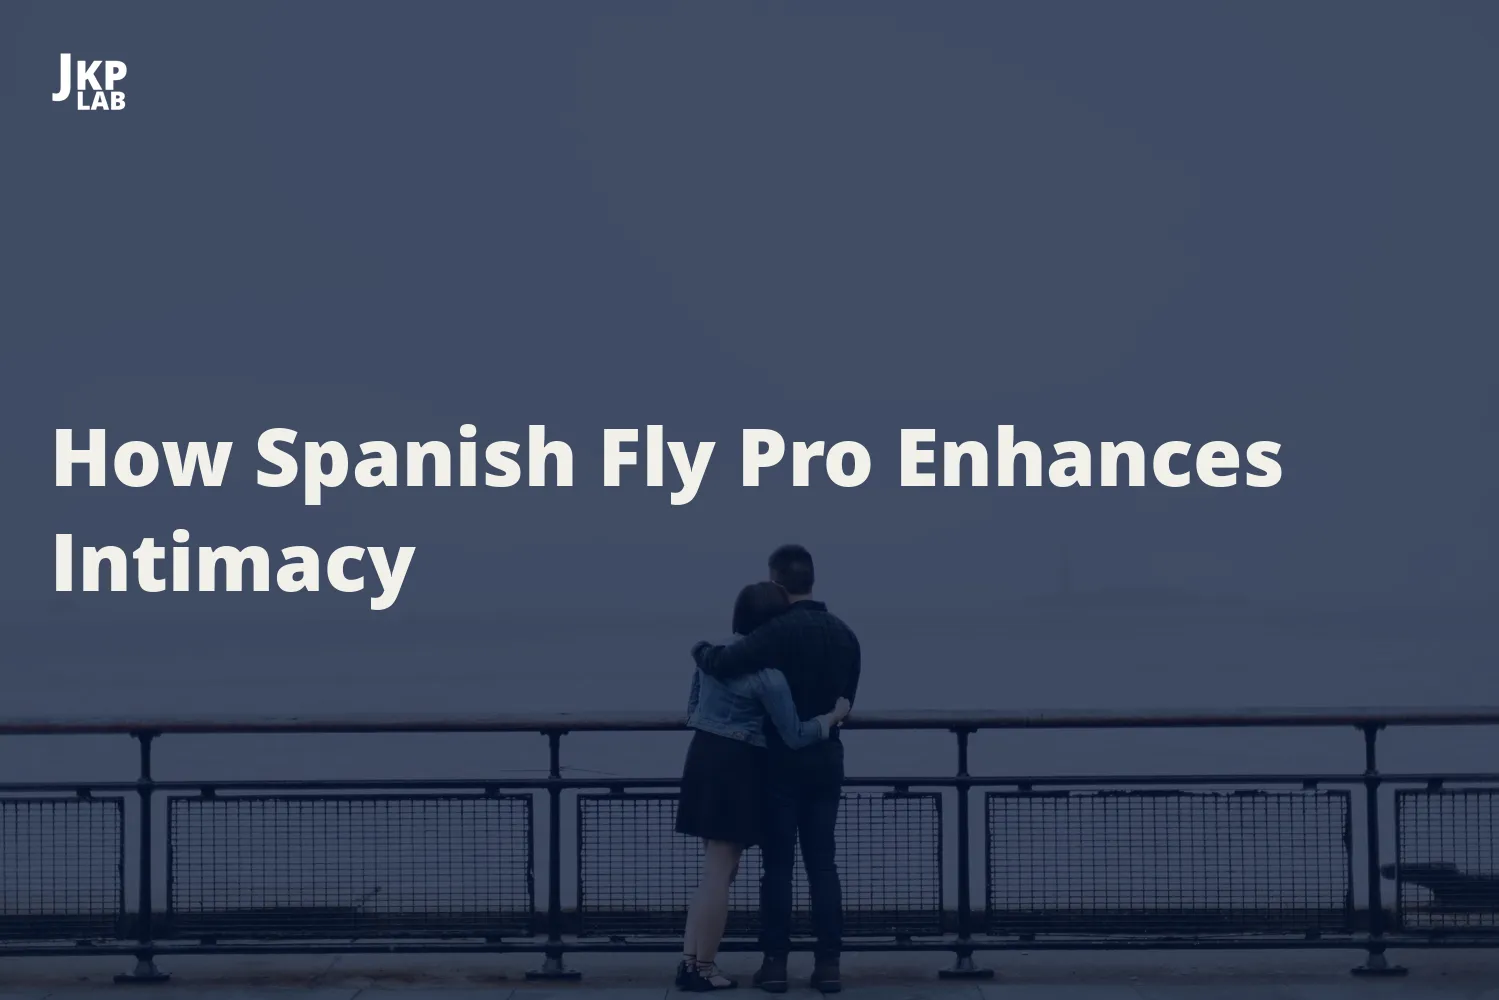 Legality of Spanish Fly Pro